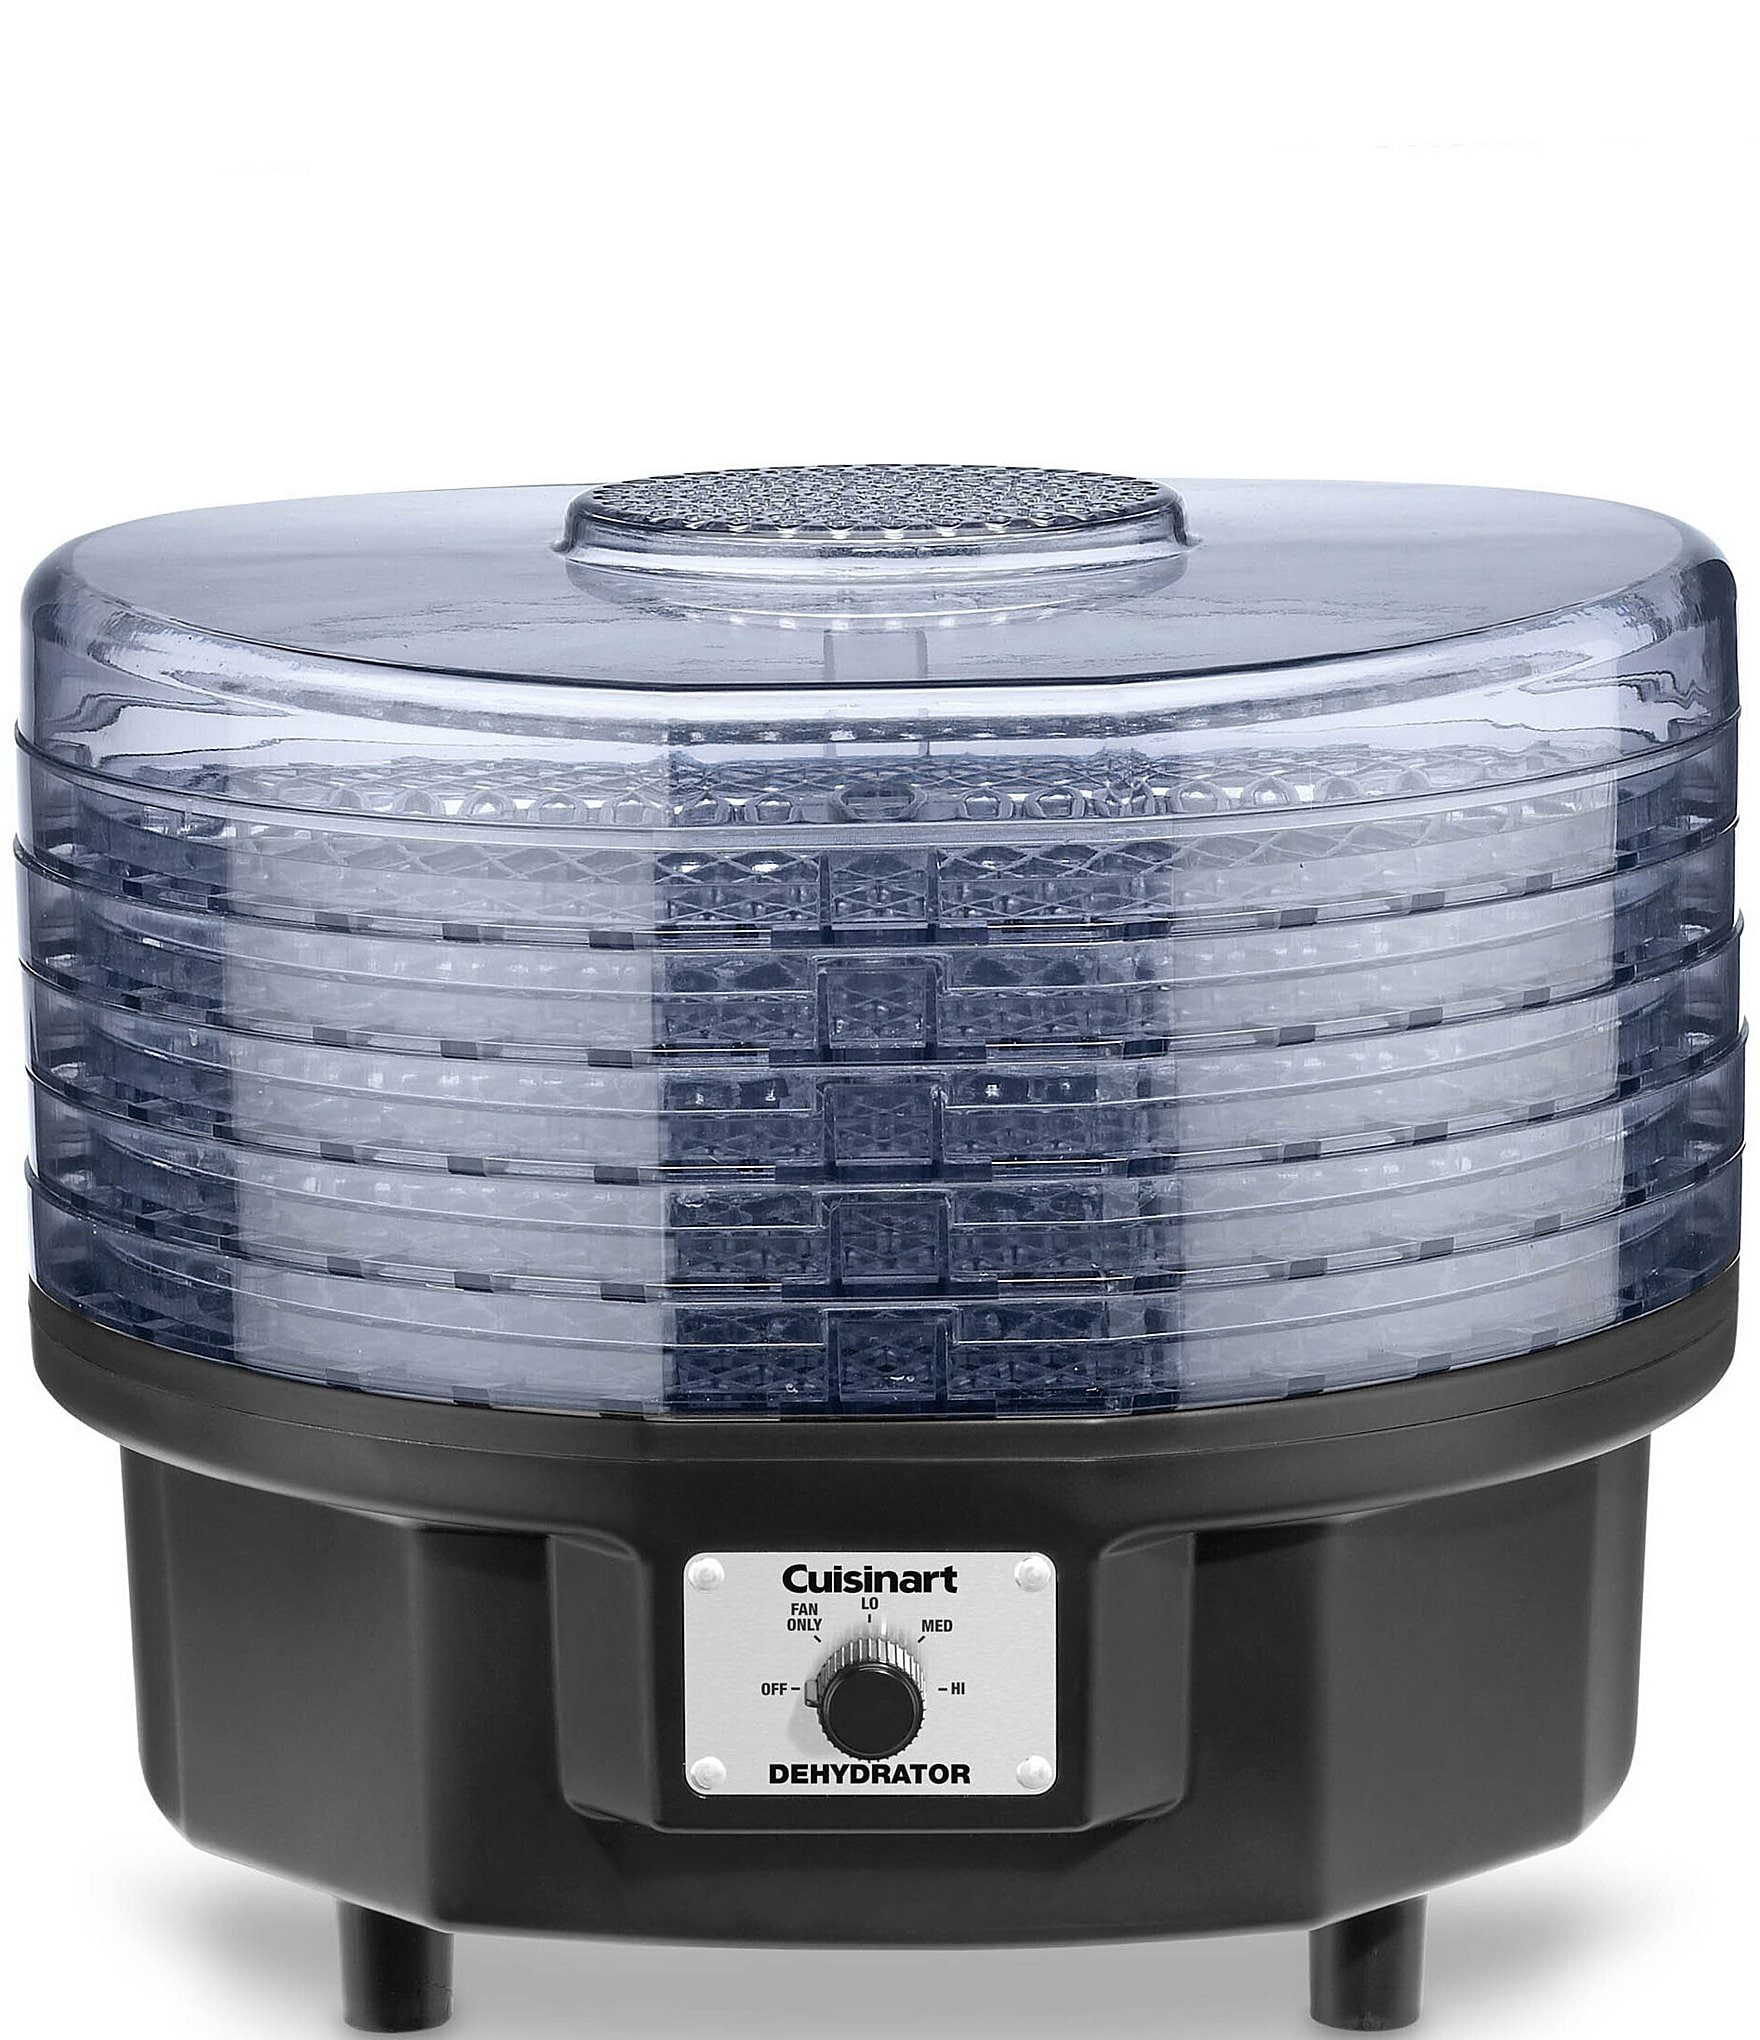 Best Dehydrator to Buy?, Styles, Brands, Prices